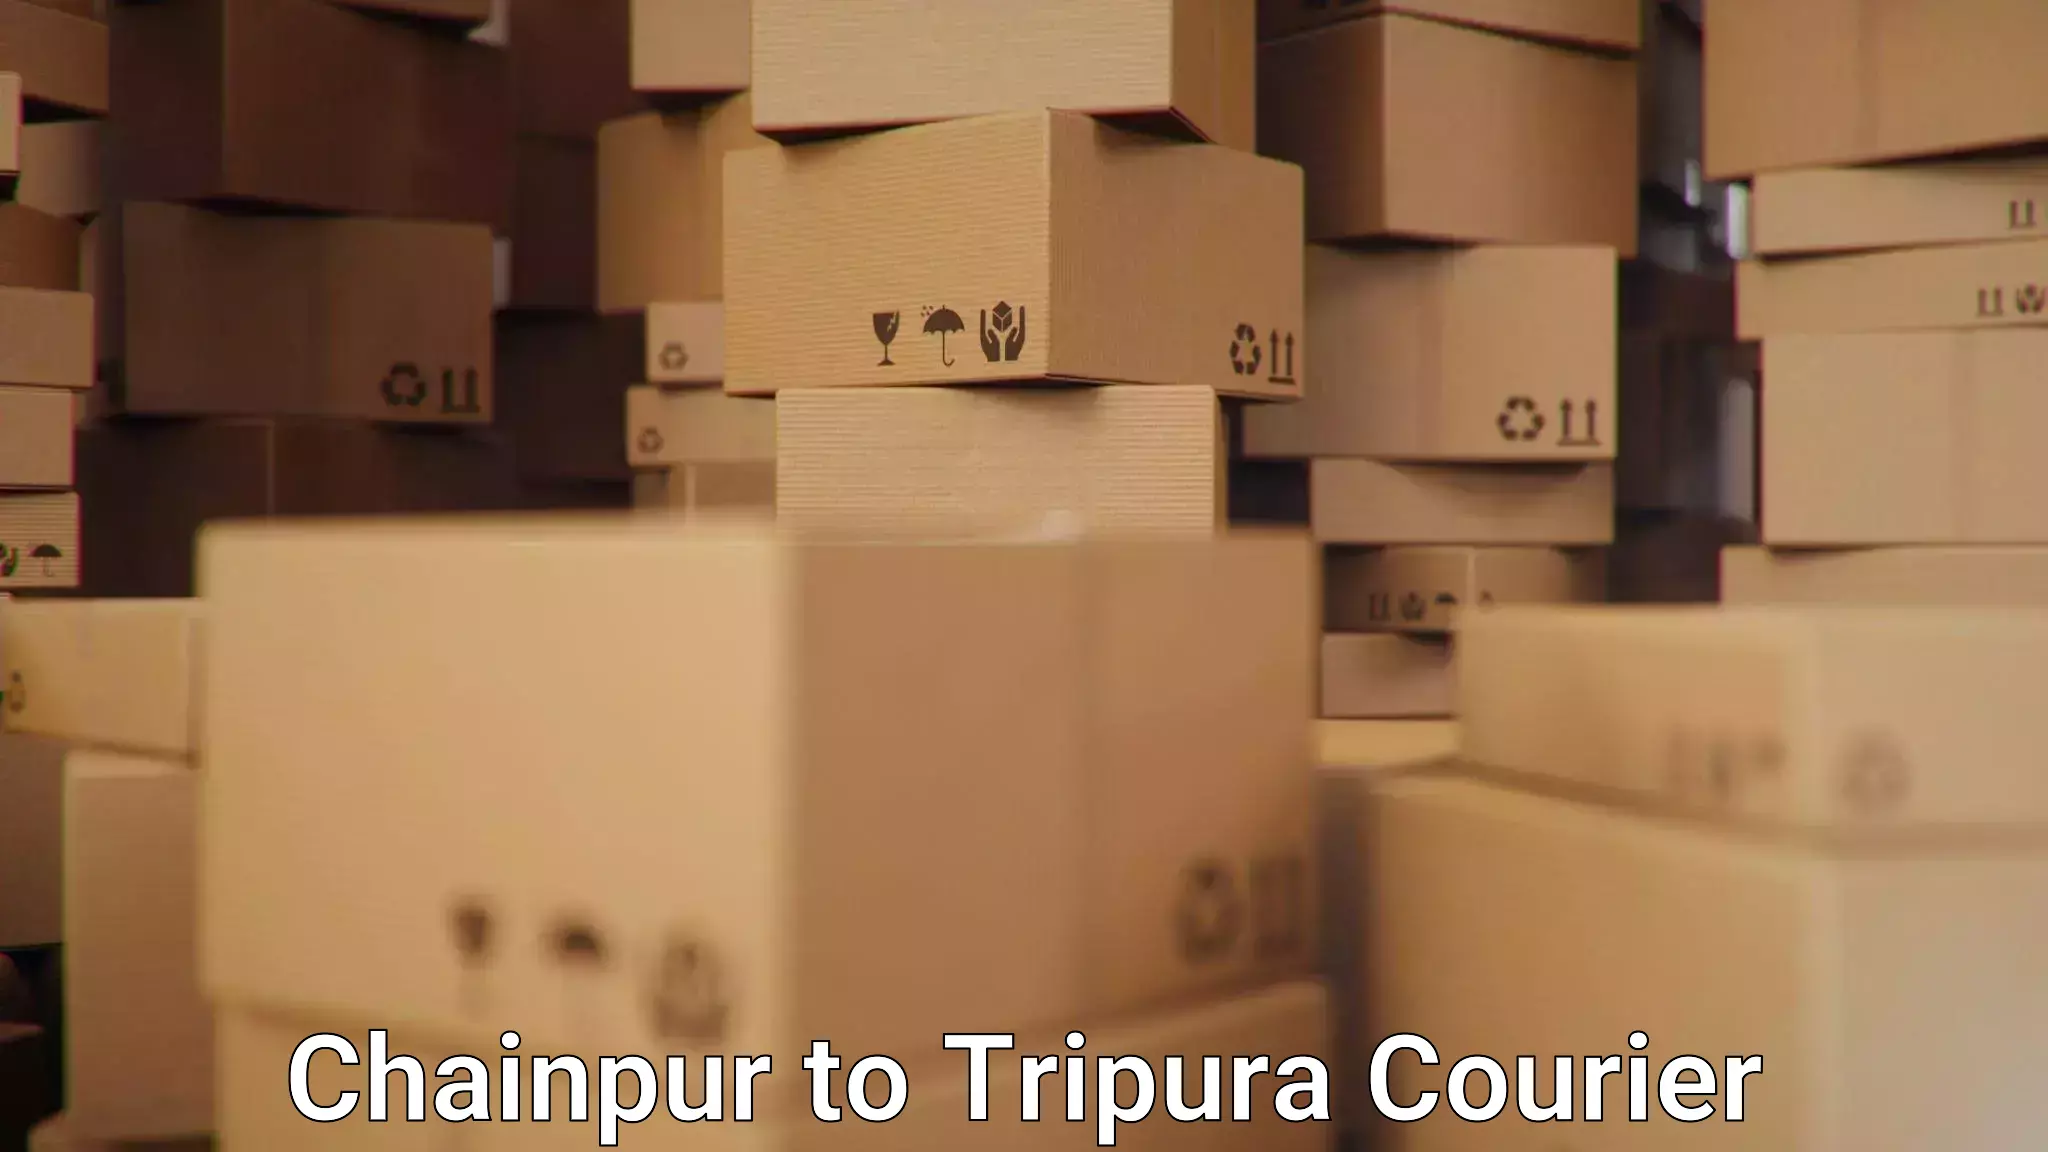 State-of-the-art courier technology Chainpur to Aambasa